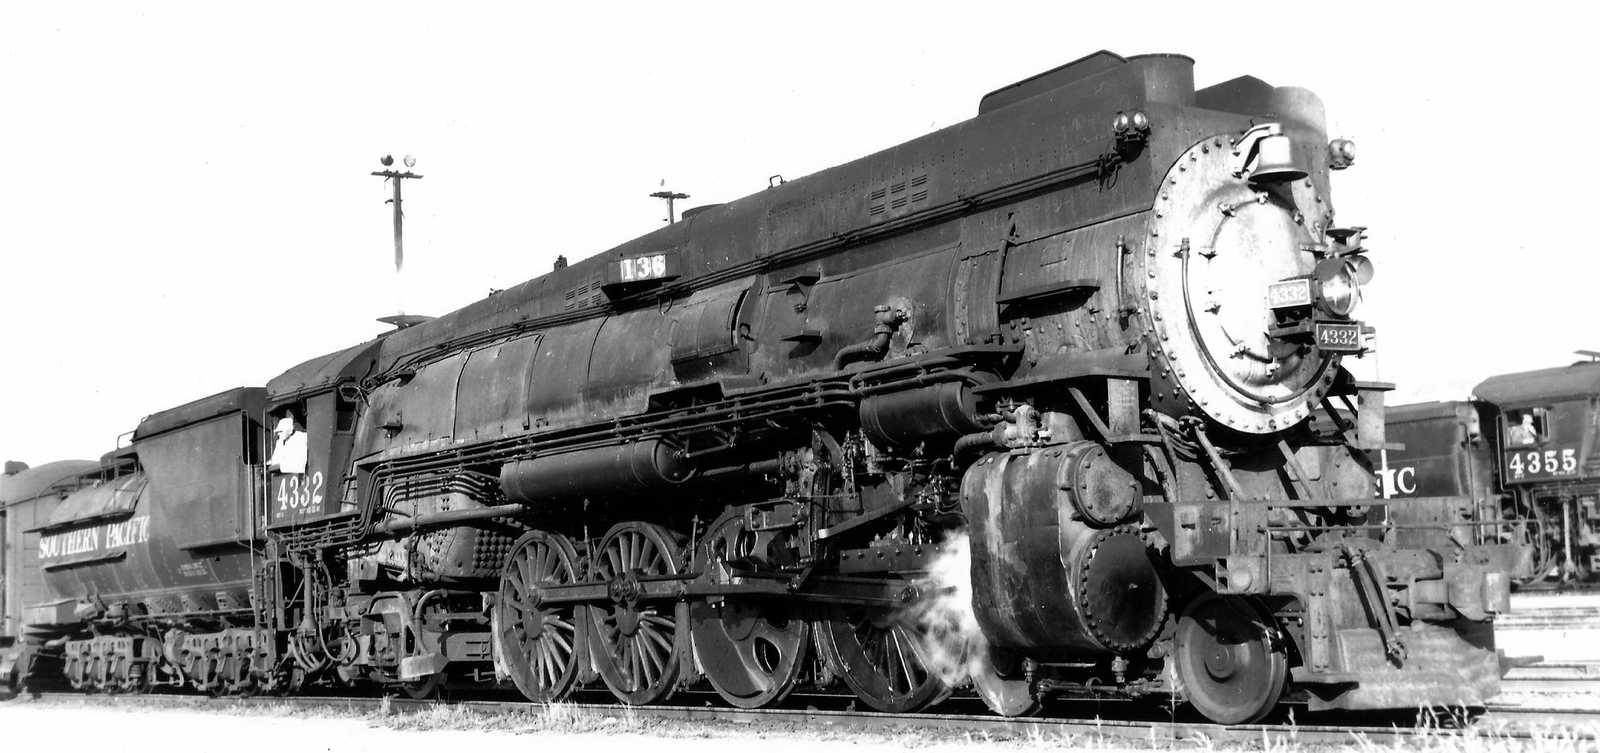 MT-3 No. 4332 with Skyline Casing in April 1952 in San Francisco